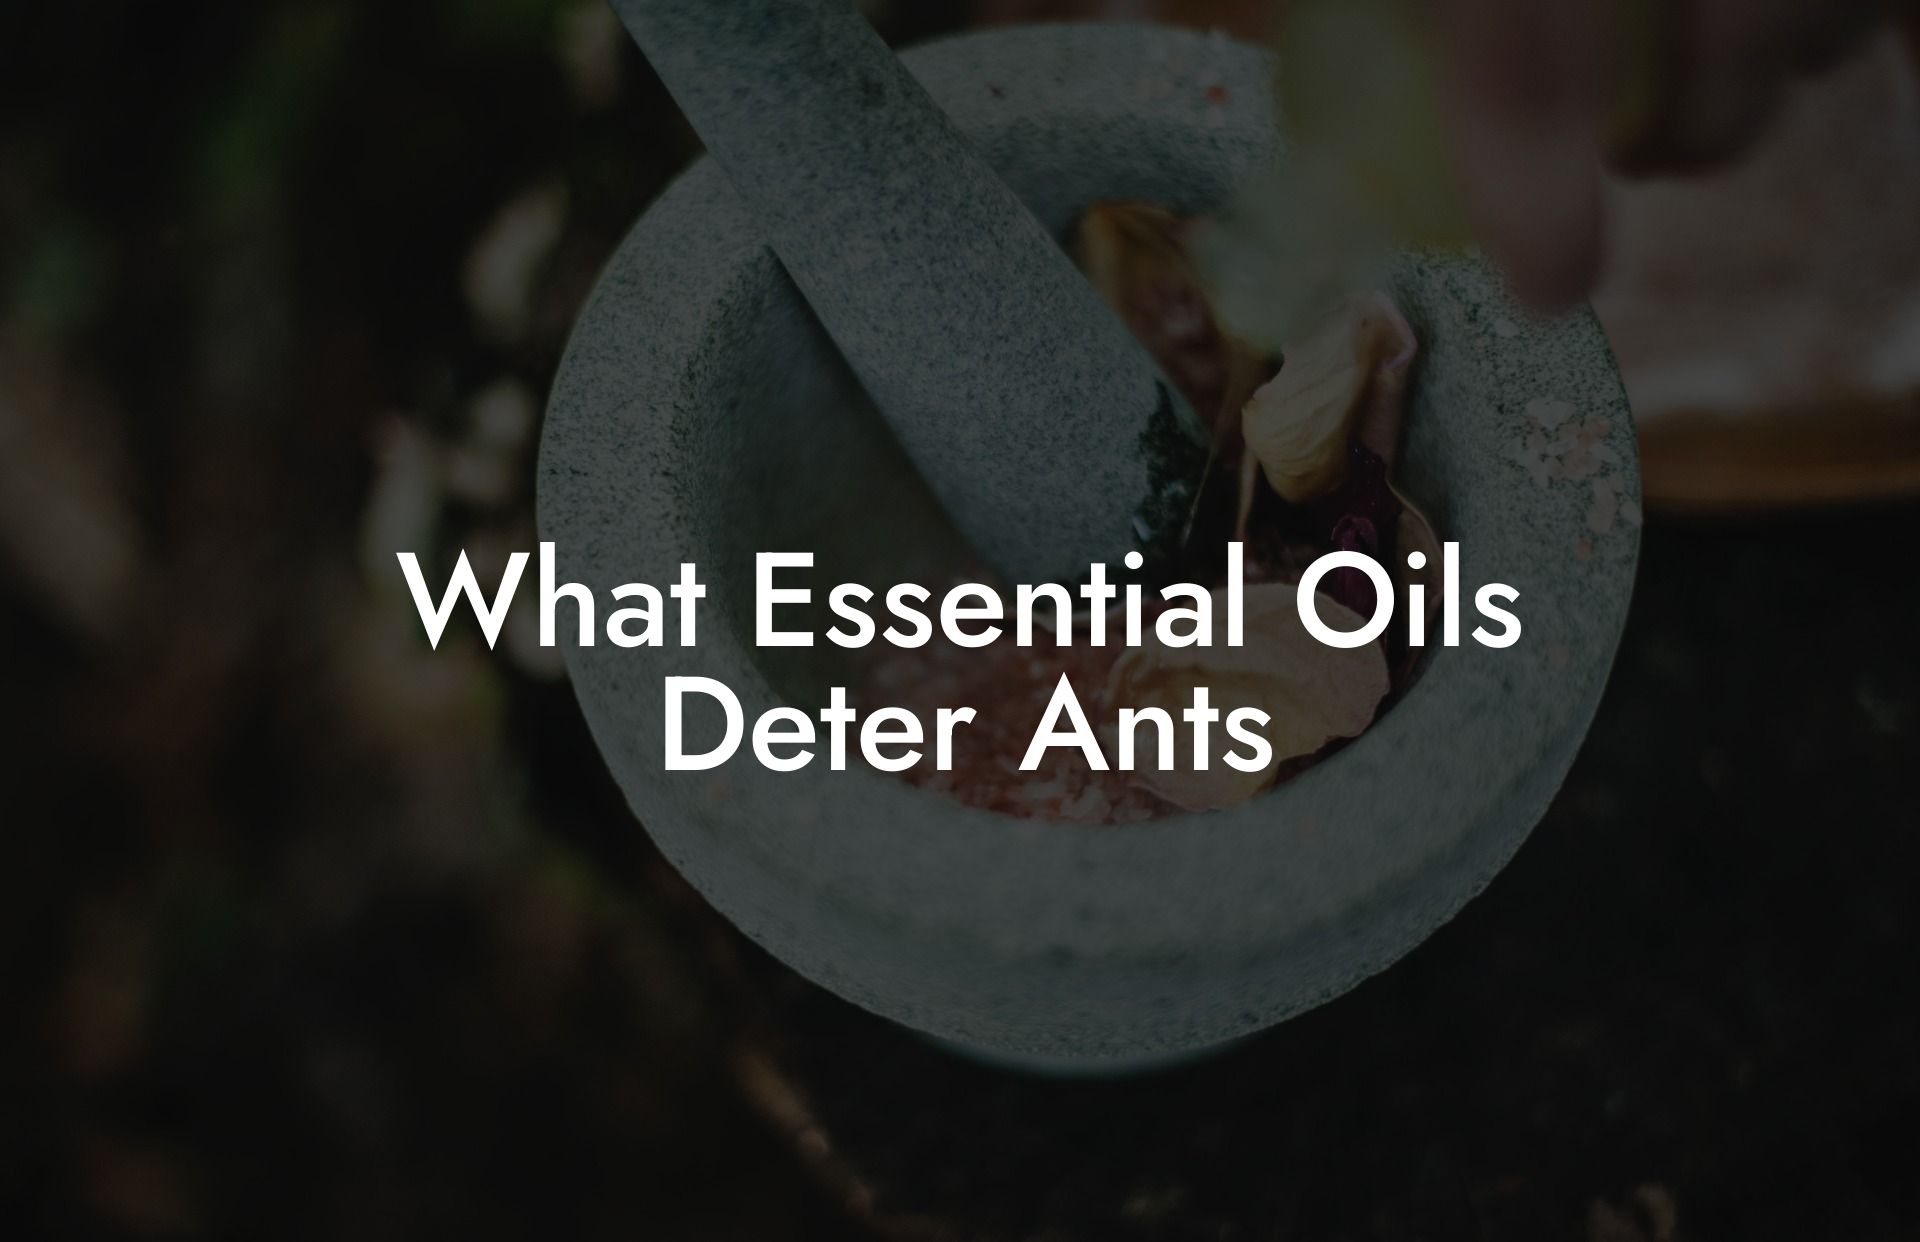 What Essential Oils Deter Ants